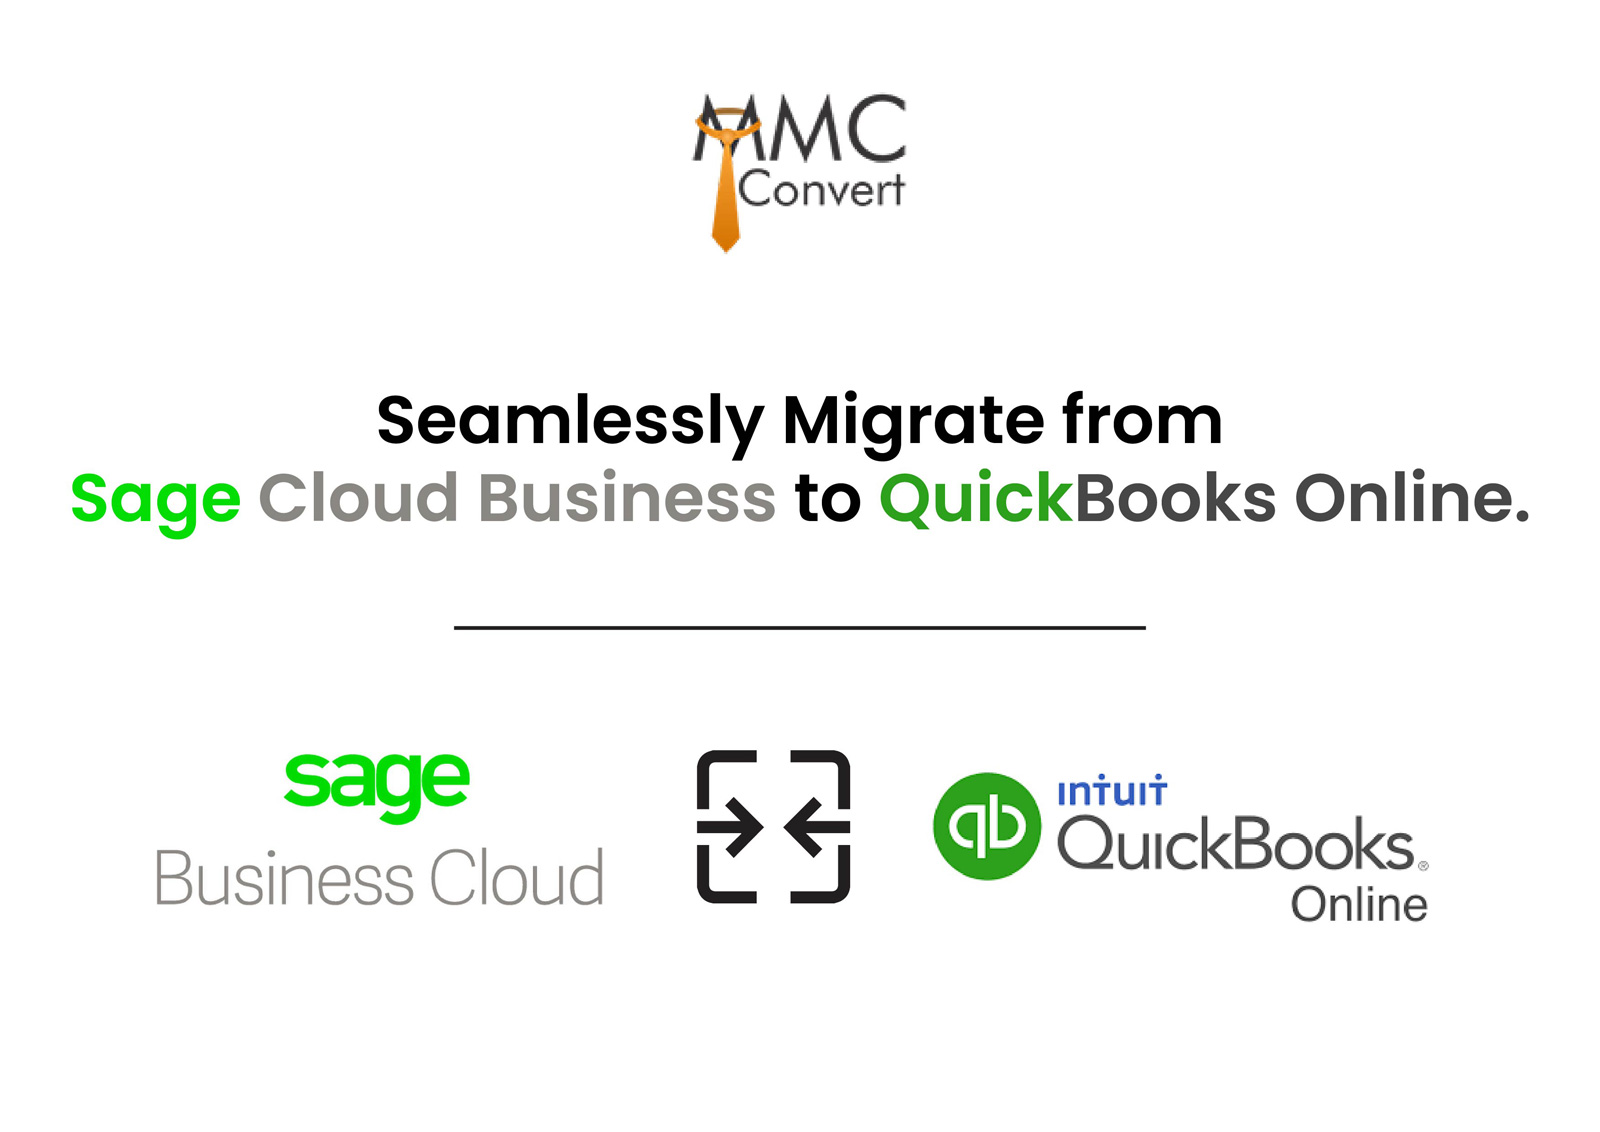 Seamlessly Migrate from Sage Cloud Business to QuickBooks Online